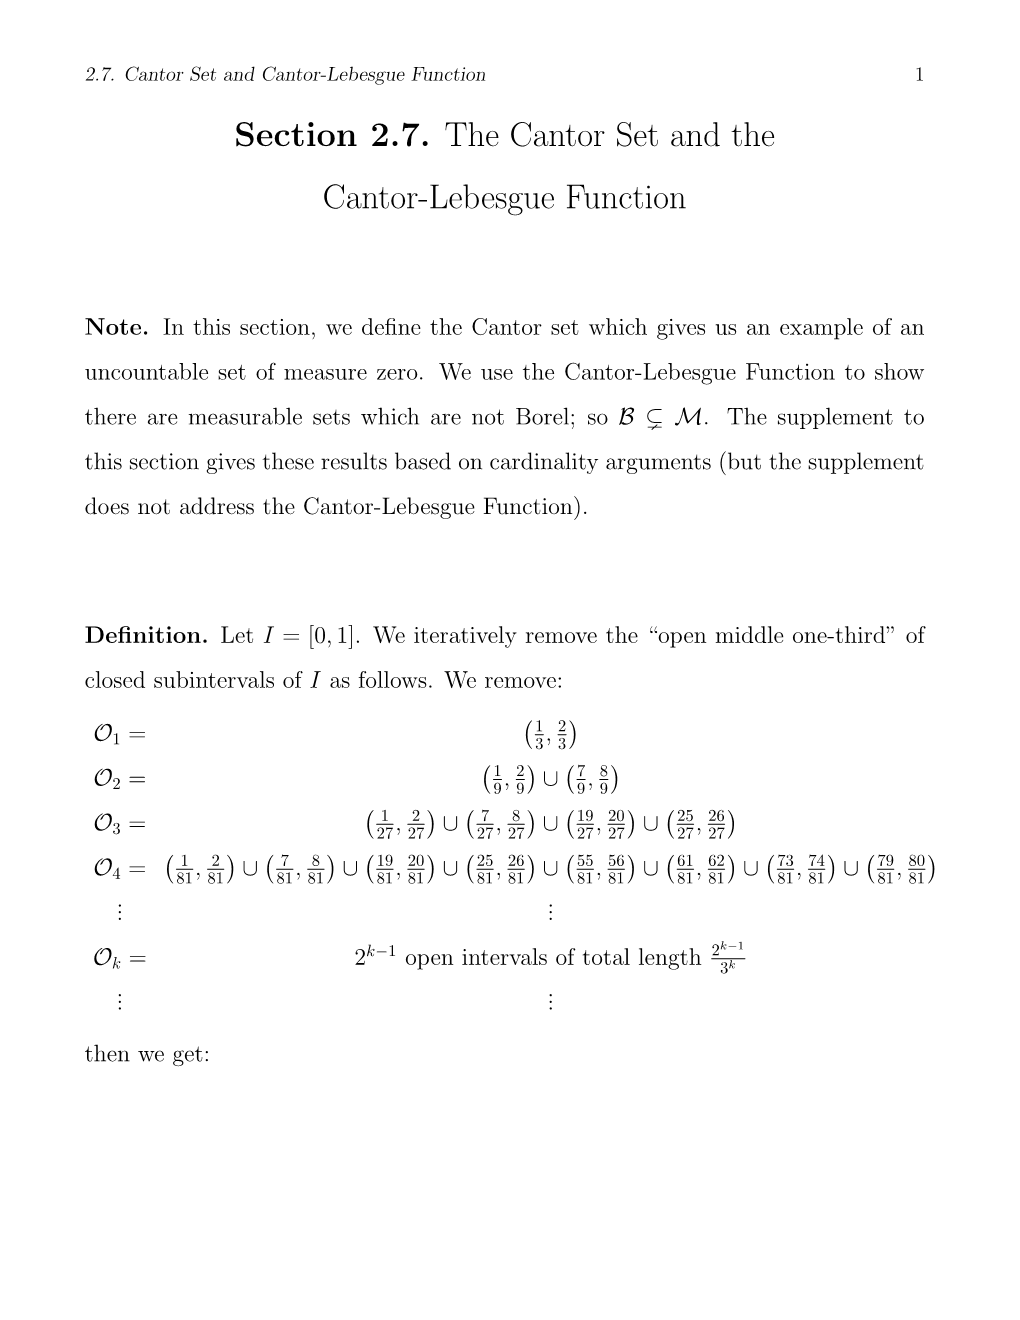 Section 2.7. the Cantor Set and the Cantor-Lebesgue Function